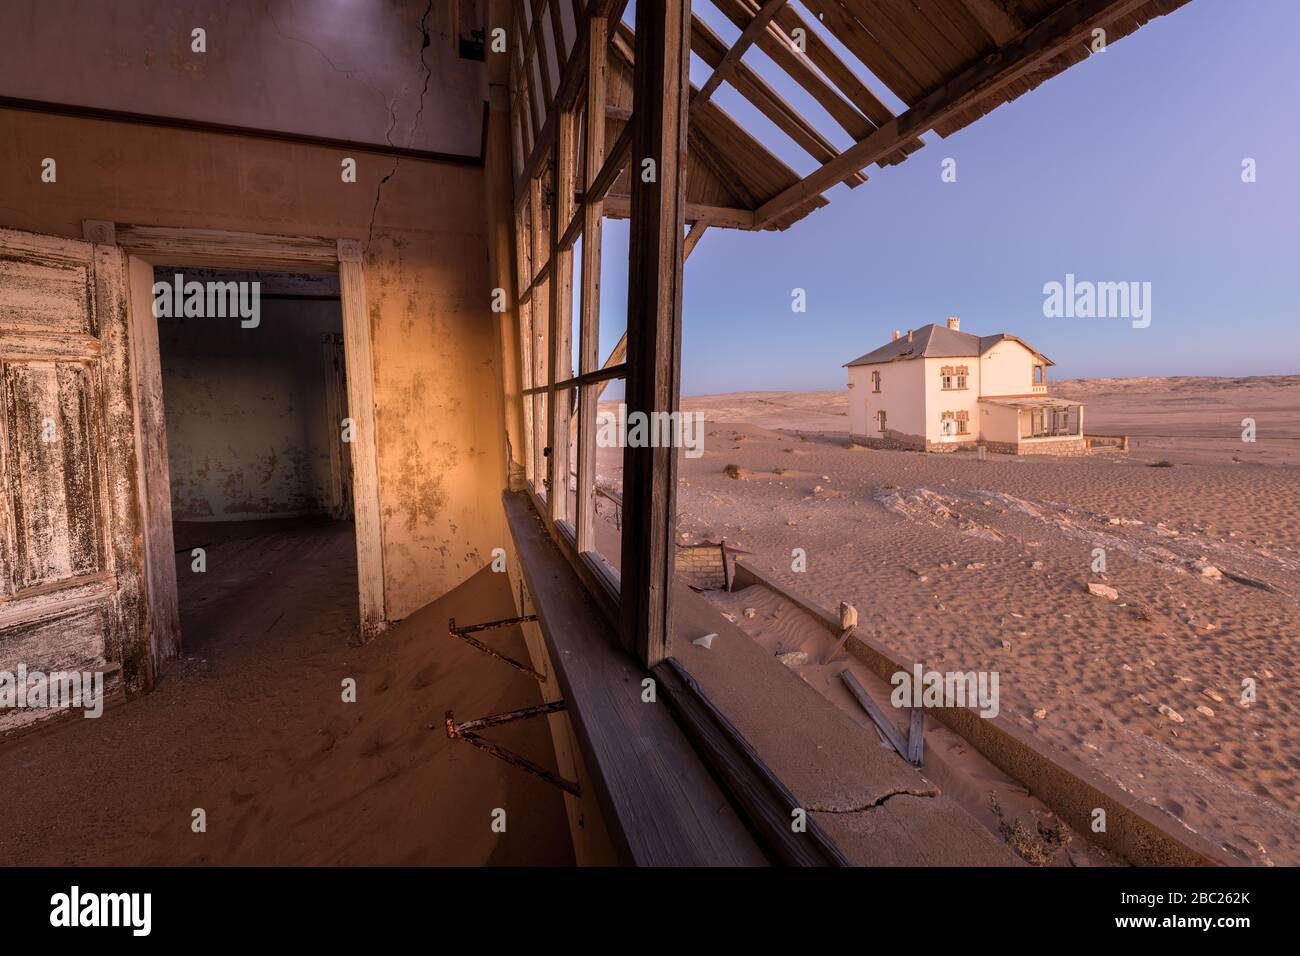 A photograph inside an abandoned house after sunset, with desert sand and a  house visible through broken windows, taken in the ghost town of Kolmansko  Stock Photo - Alamy